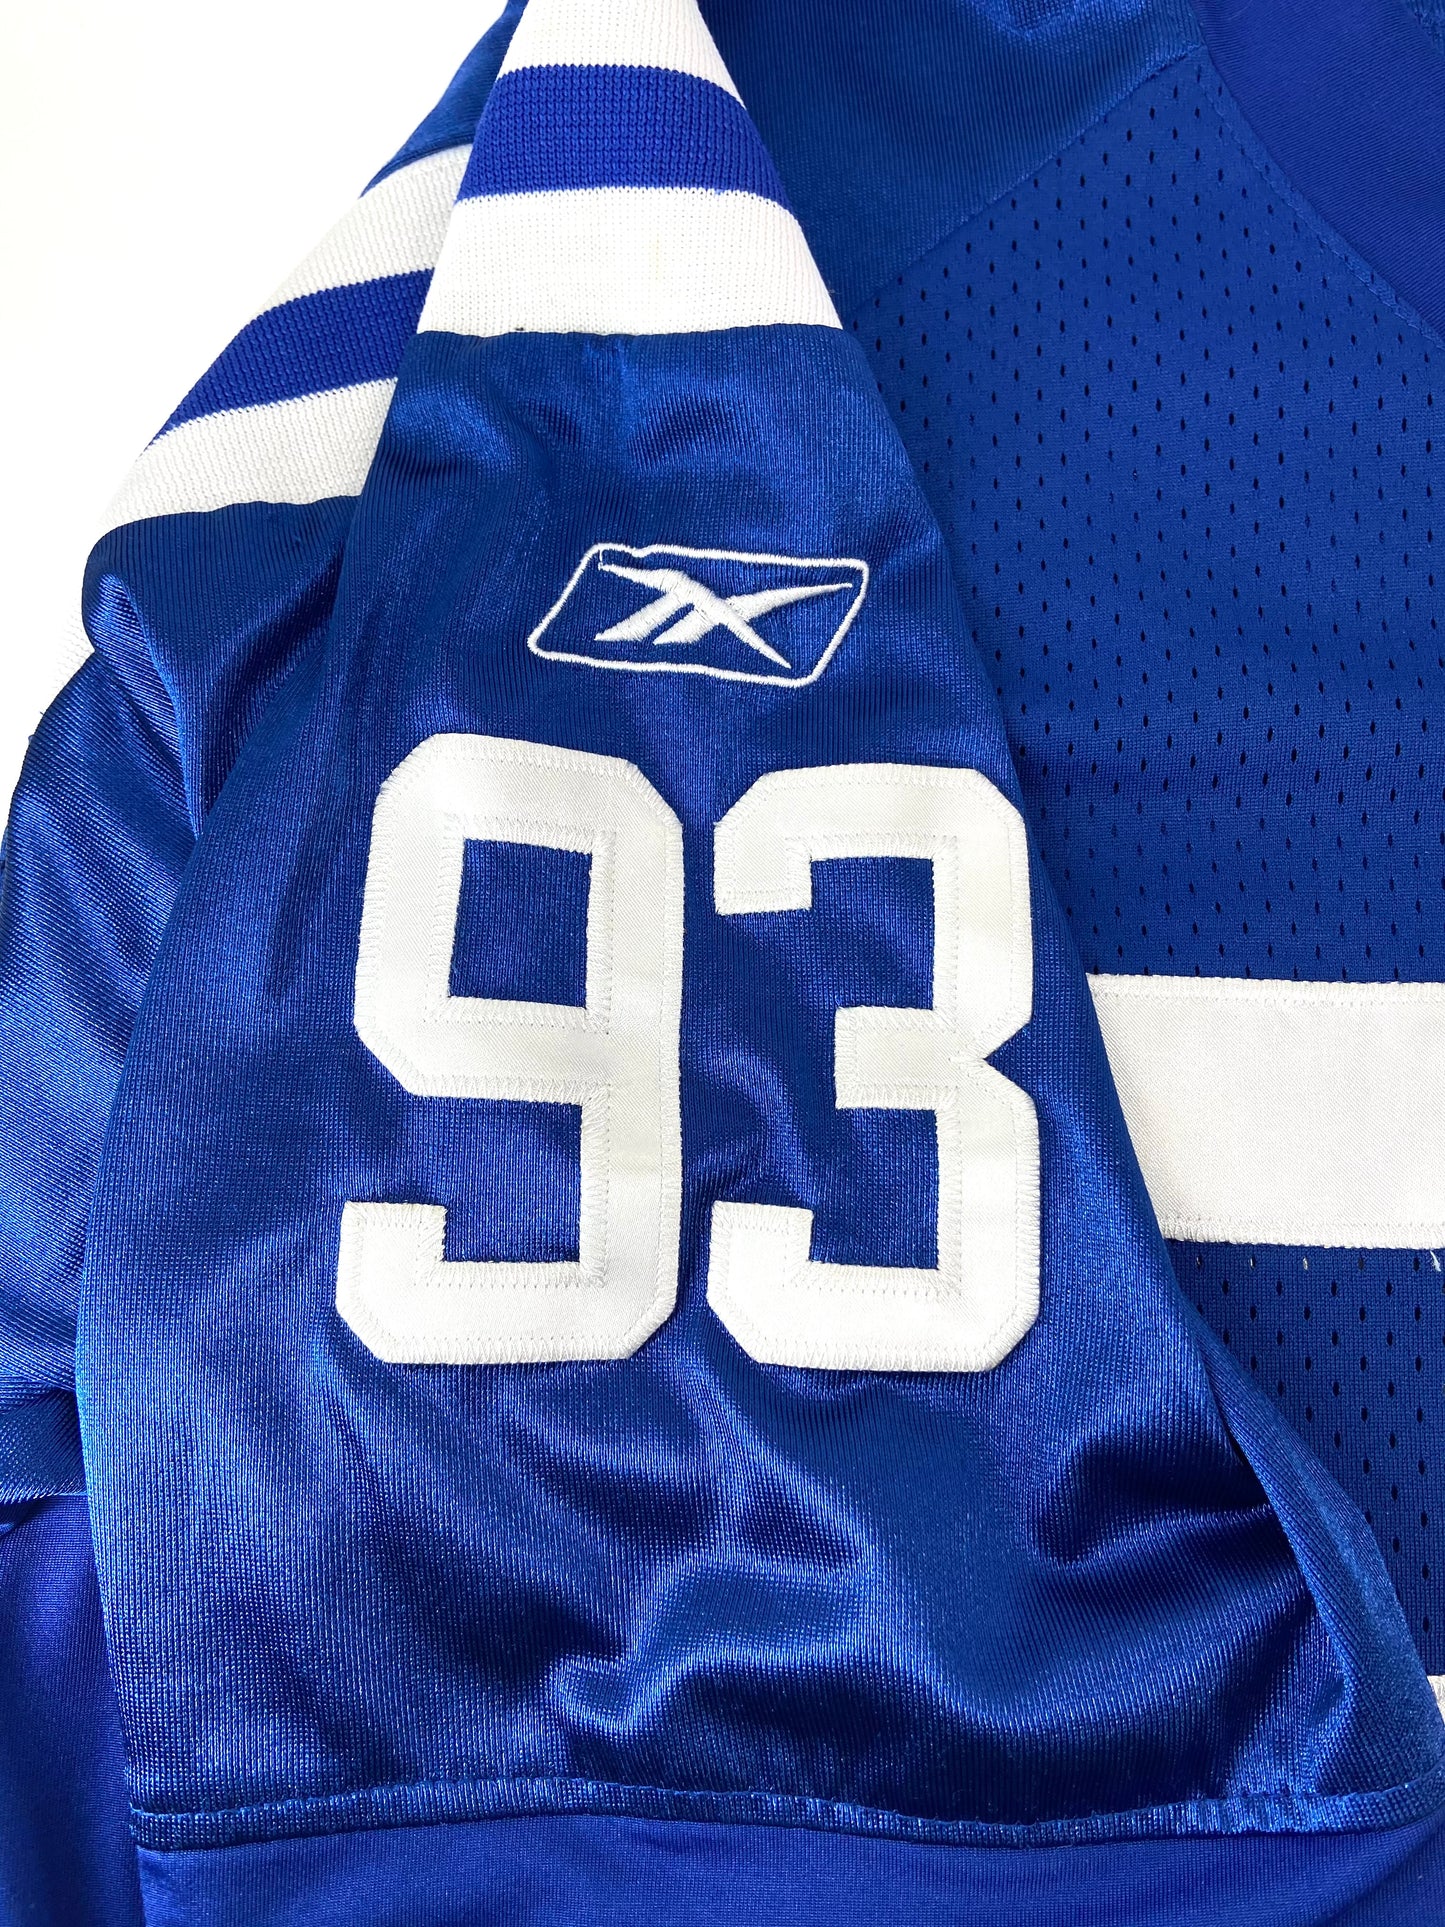 Dwight Freeney #93 NFL Indianapolis Colts Size 50 Stitched Used Jersey